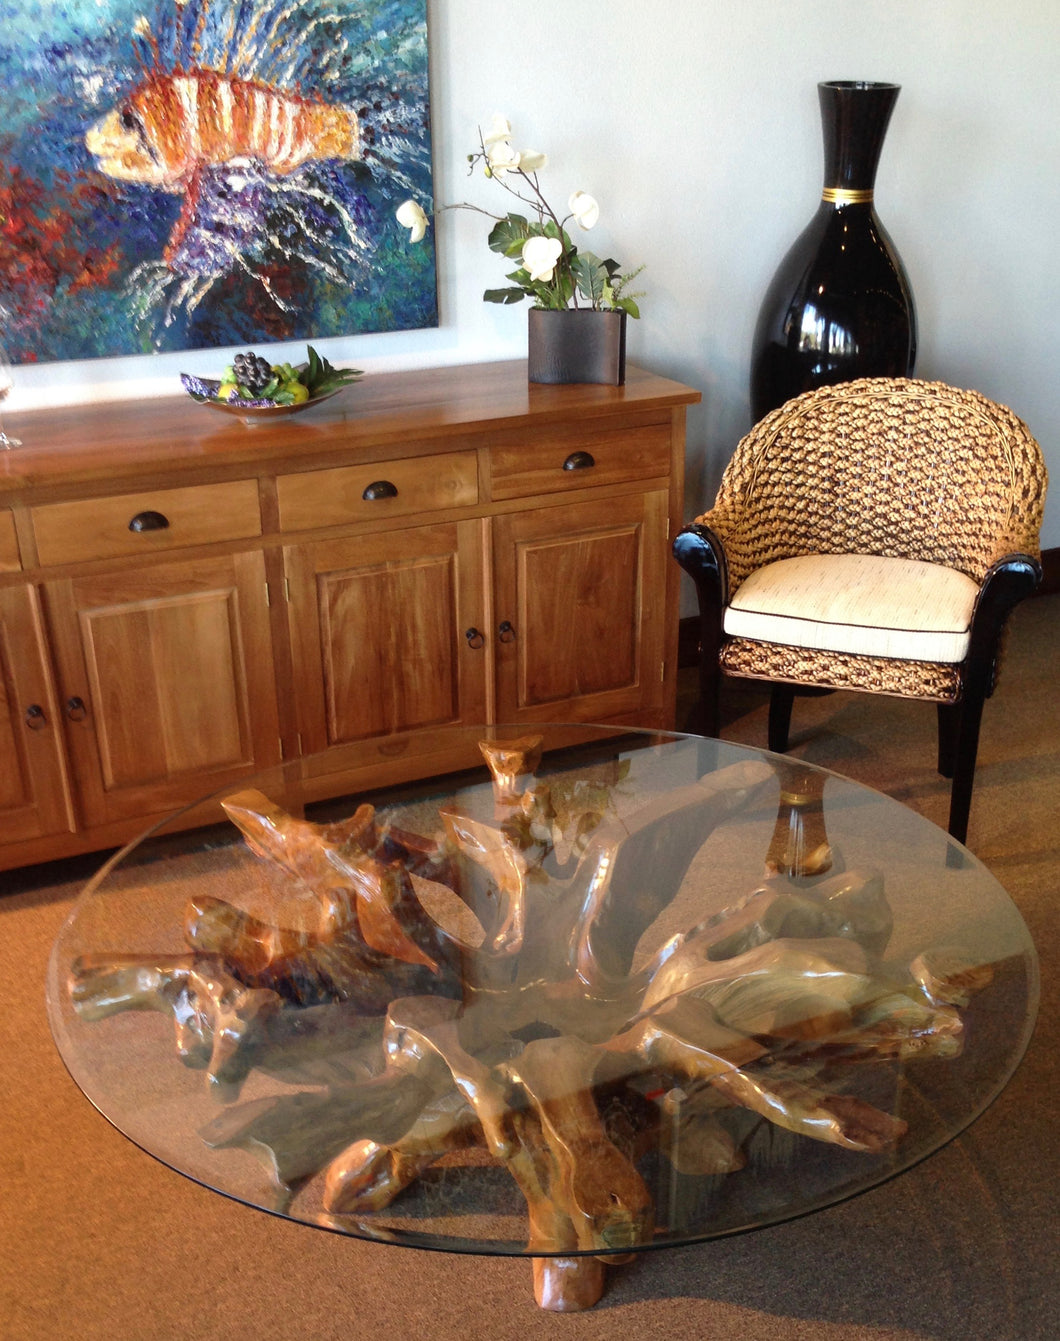 Teak Wood Root Coffee Table including a 63 Round Glass Top by